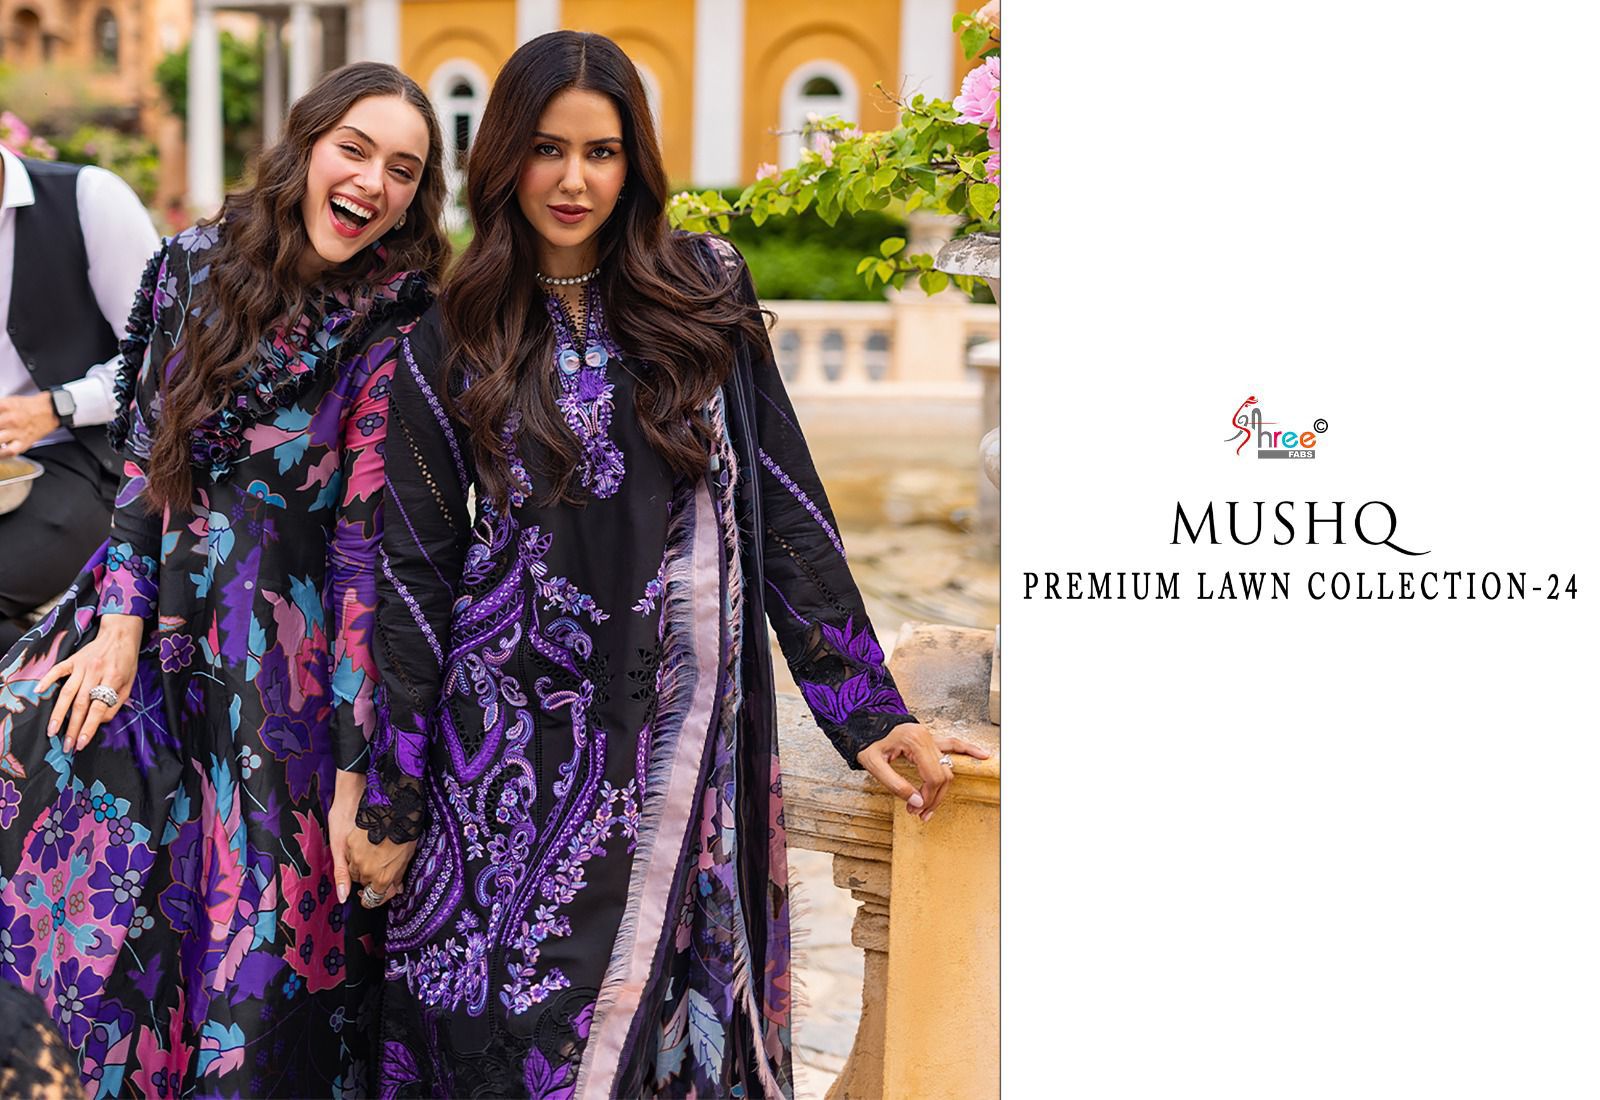 Shree Fabs Mushq Premium Lawn Collection 24 Lawn Cotton With Embroidery Work Salwar Suits Supplier